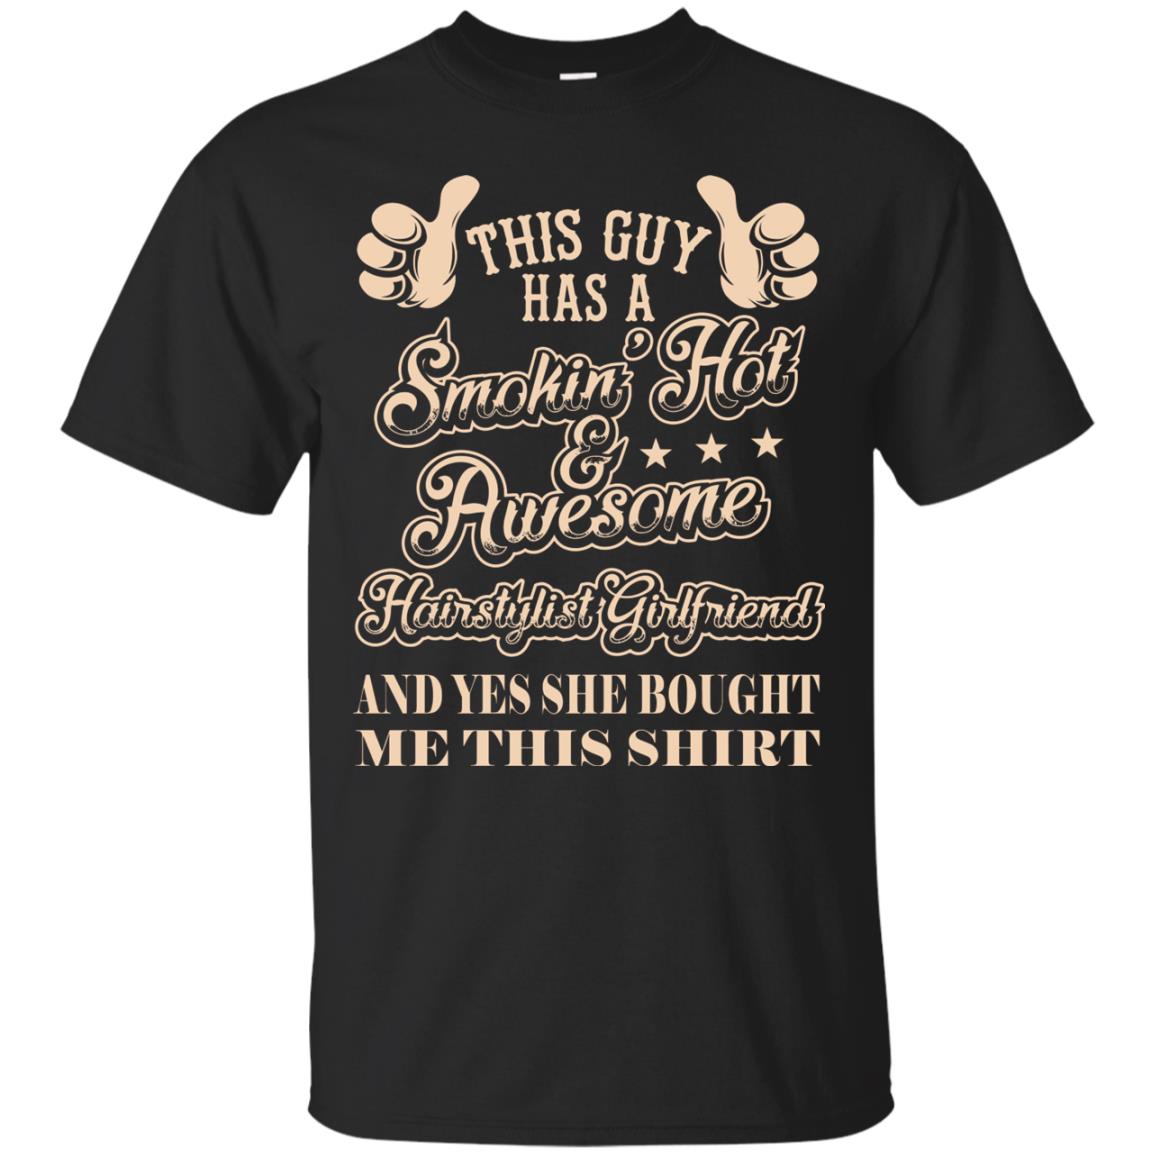 Smokin Hot and Awesome - Apparel